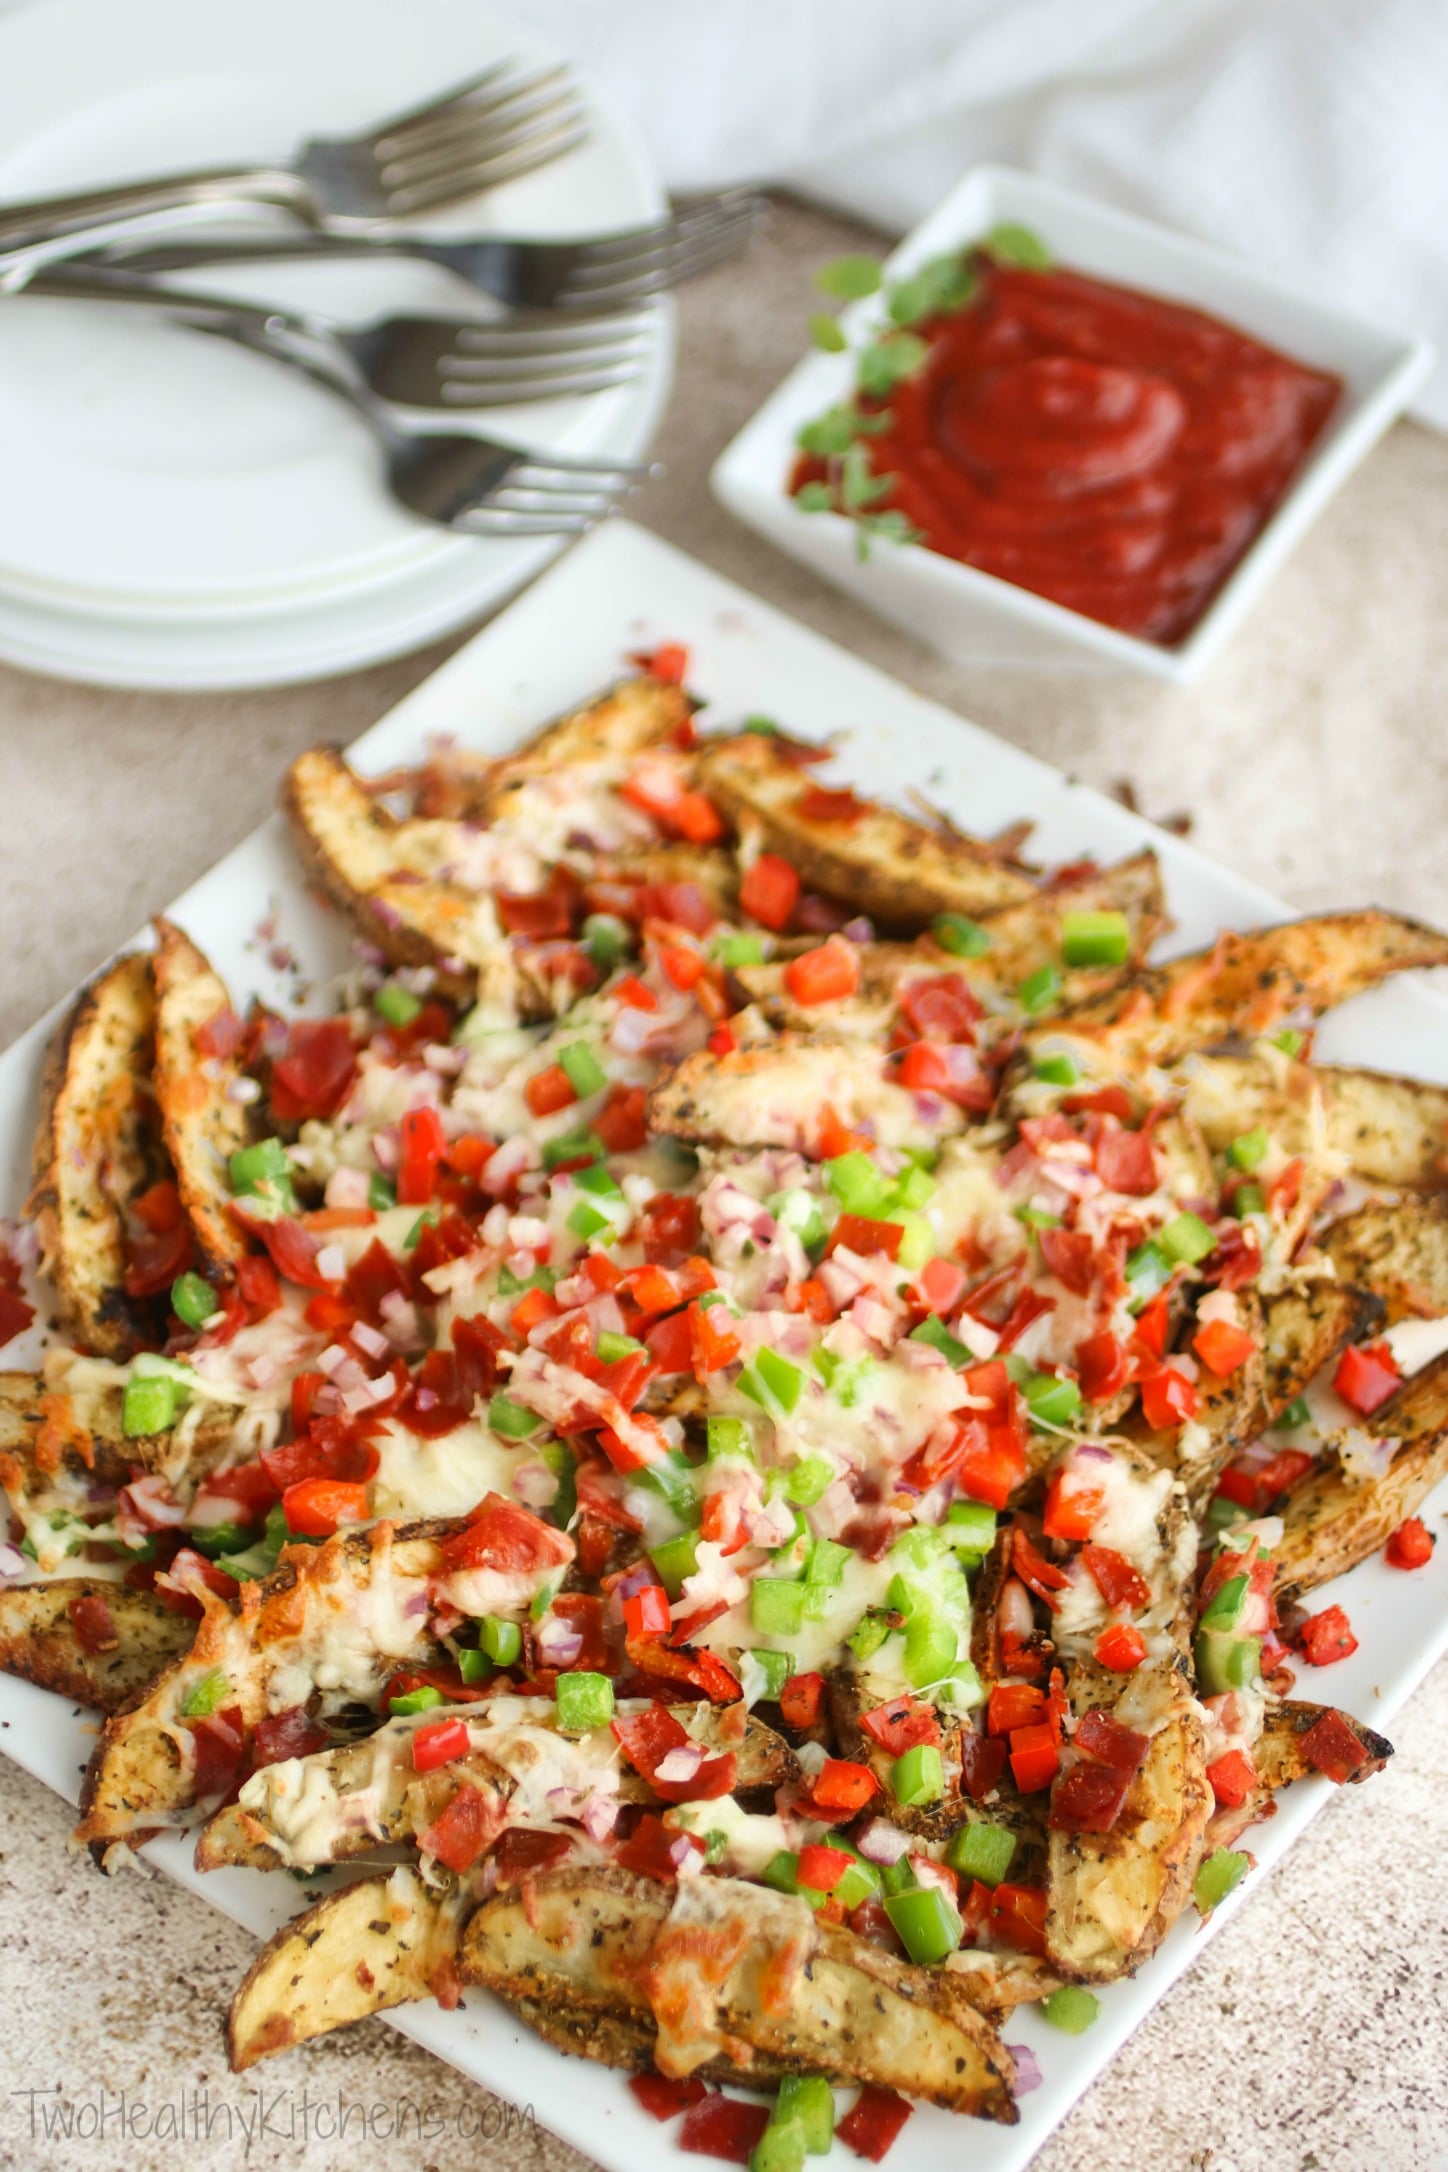 Cheesy Oven-Baked Pizza Fries ~ These Oven-Baked Pizza Fries are so easy to make, and always a total hit! Loaded with cheesy pizza flavors for a deliciously fun twist! A great snack or appetizer … and perfect for game day! {www.TwoHealthyKitchens.com}